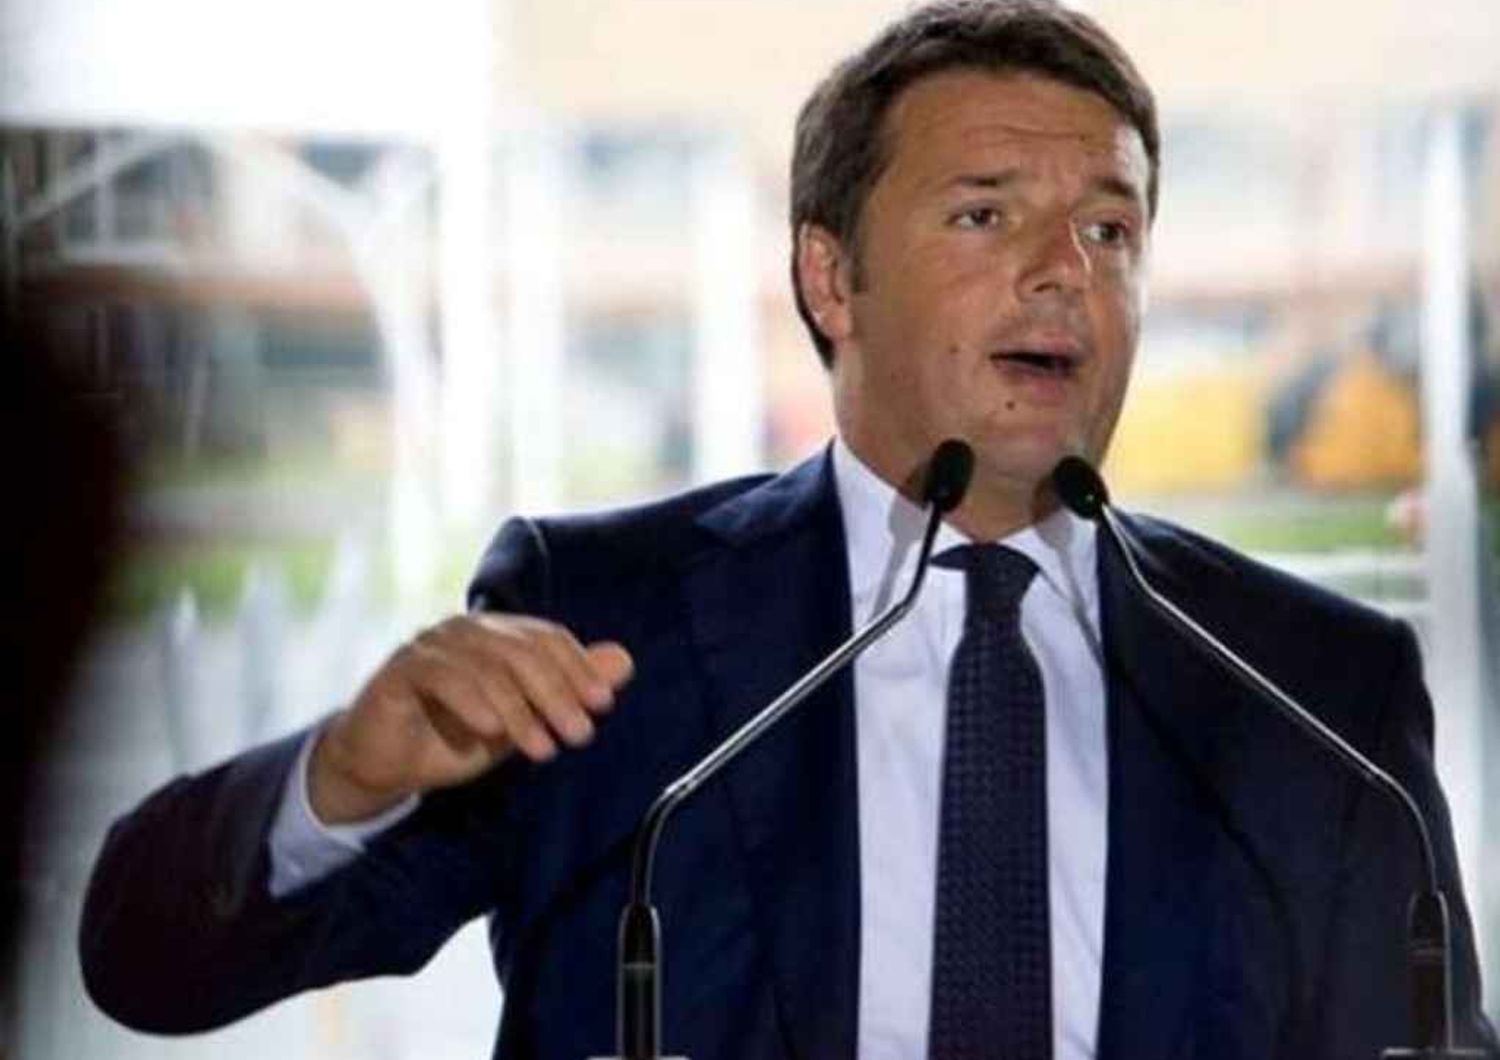 Renzi supports France's right to choose own financial path